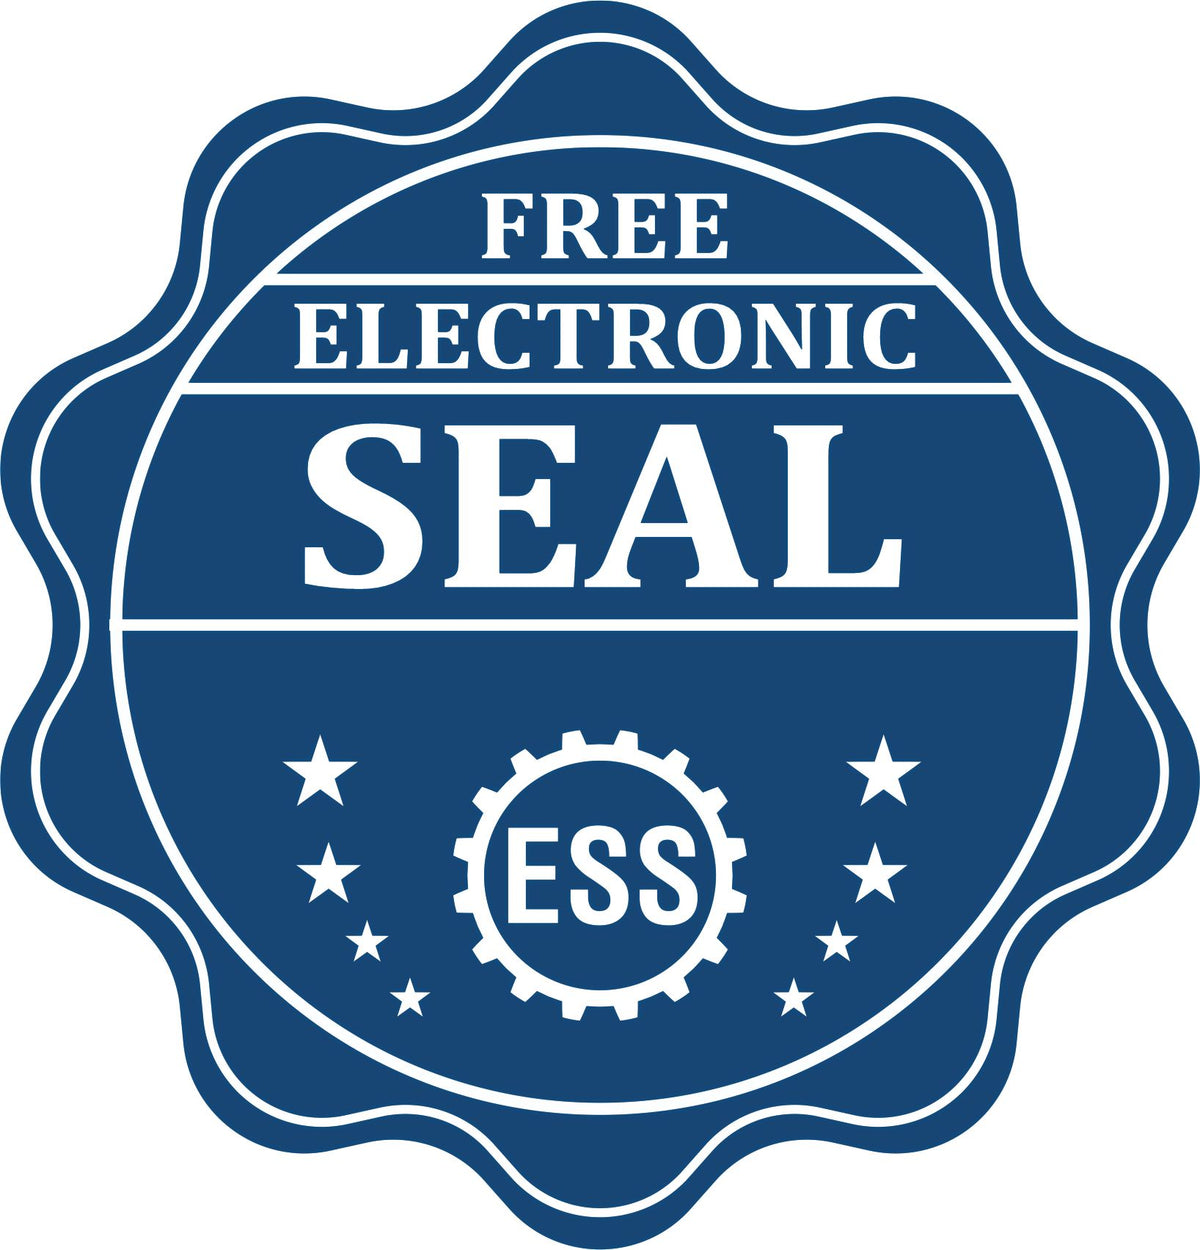 A badge showing a free electronic seal for the District of Columbia Professional Engineer Seal Stamp with stars and the ESS gear on the emblem.